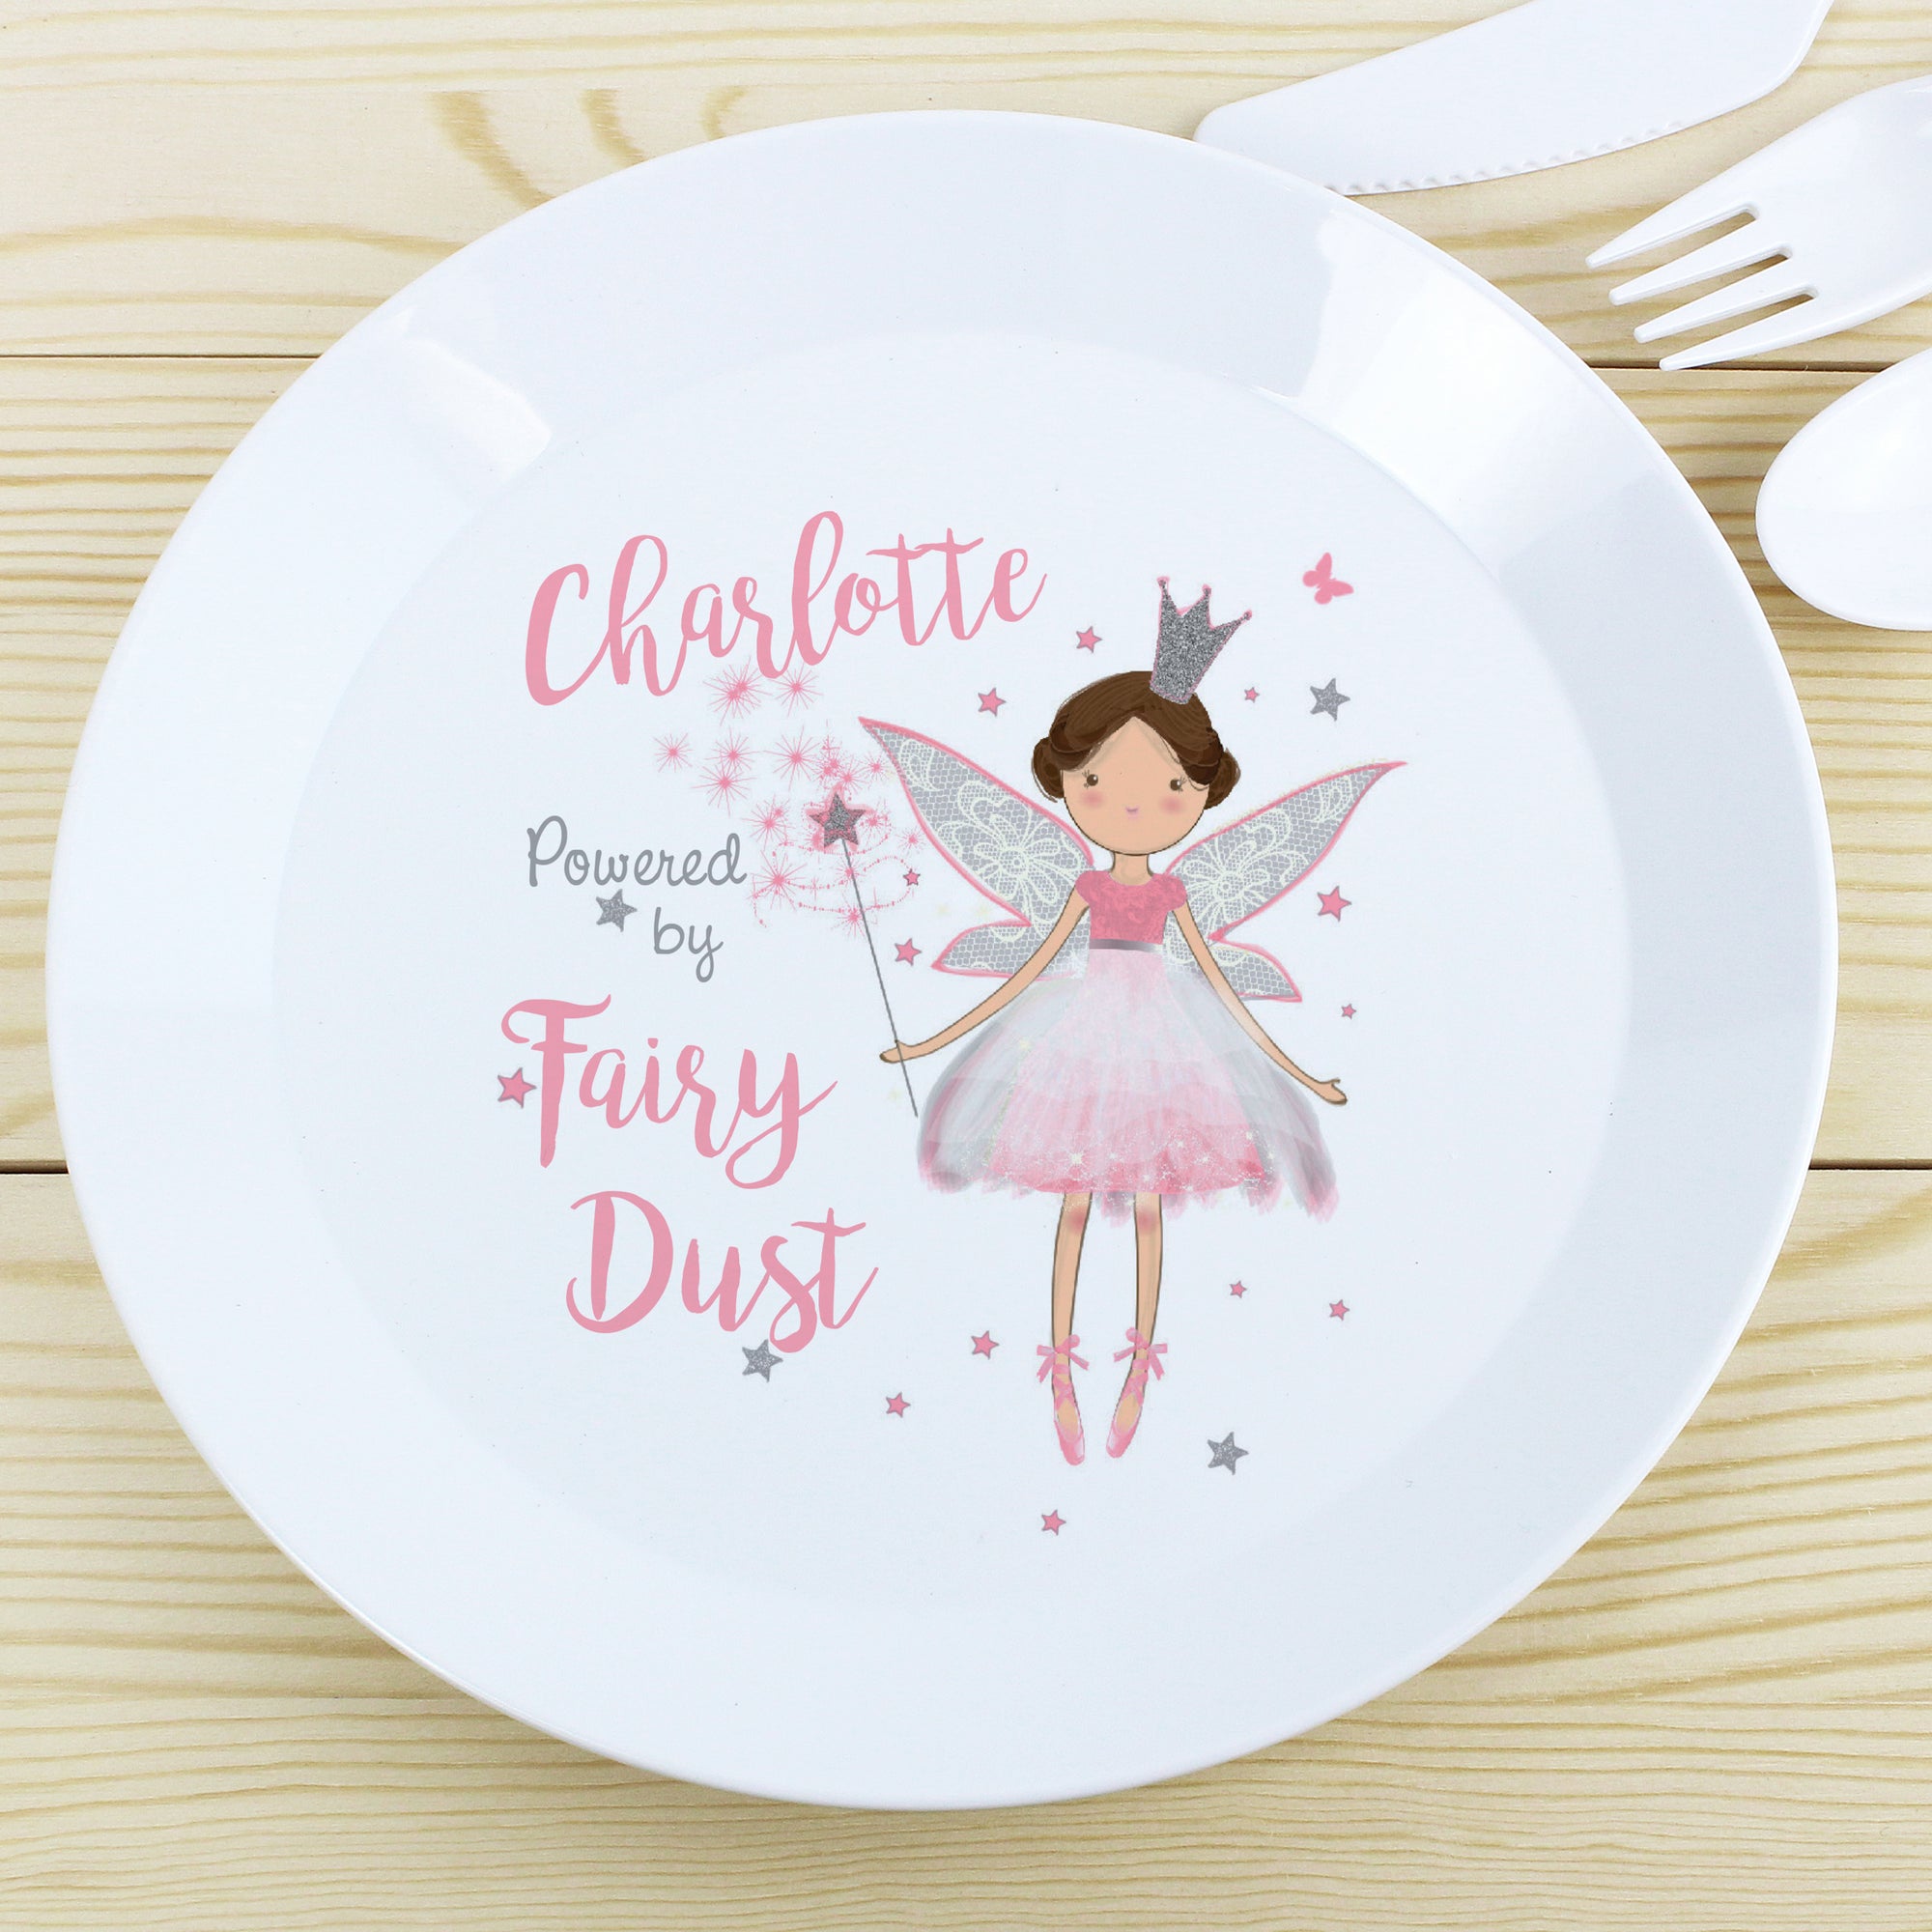 Image of a white plastic BPA free childs personalised plate. The plate is white with a rim and in the centre of the plate is a cartoon drawing of a fairy holding a wand and the text 'Powered by Fairy Dust'. The plate can be personalised with a name up to 12 characters in a pink font. The plate is part of a set and comes with a cup and cutlery set in the same theme.